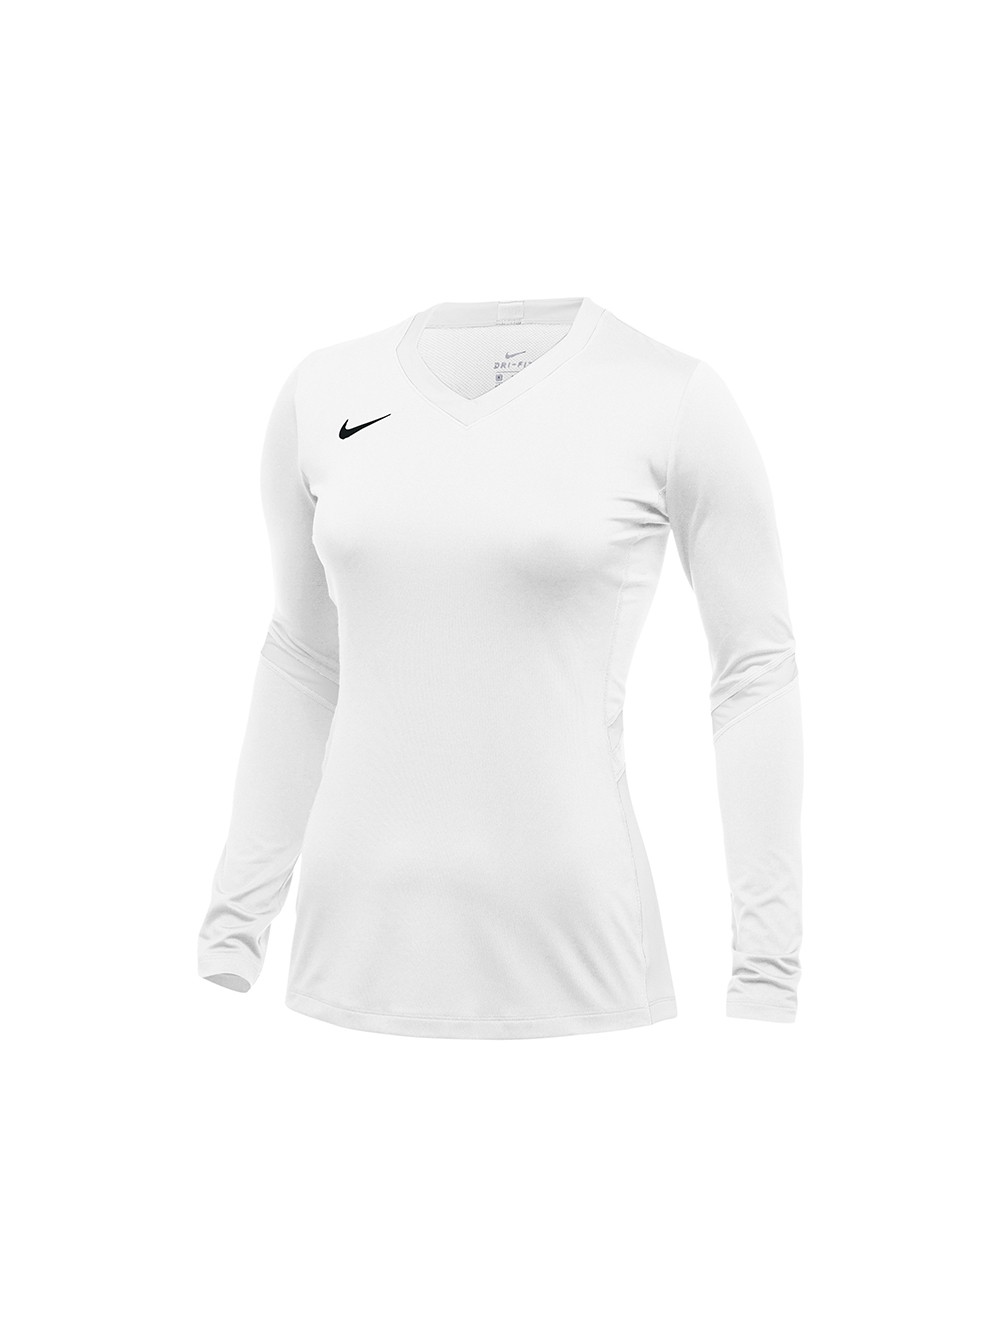 white volleyball jersey